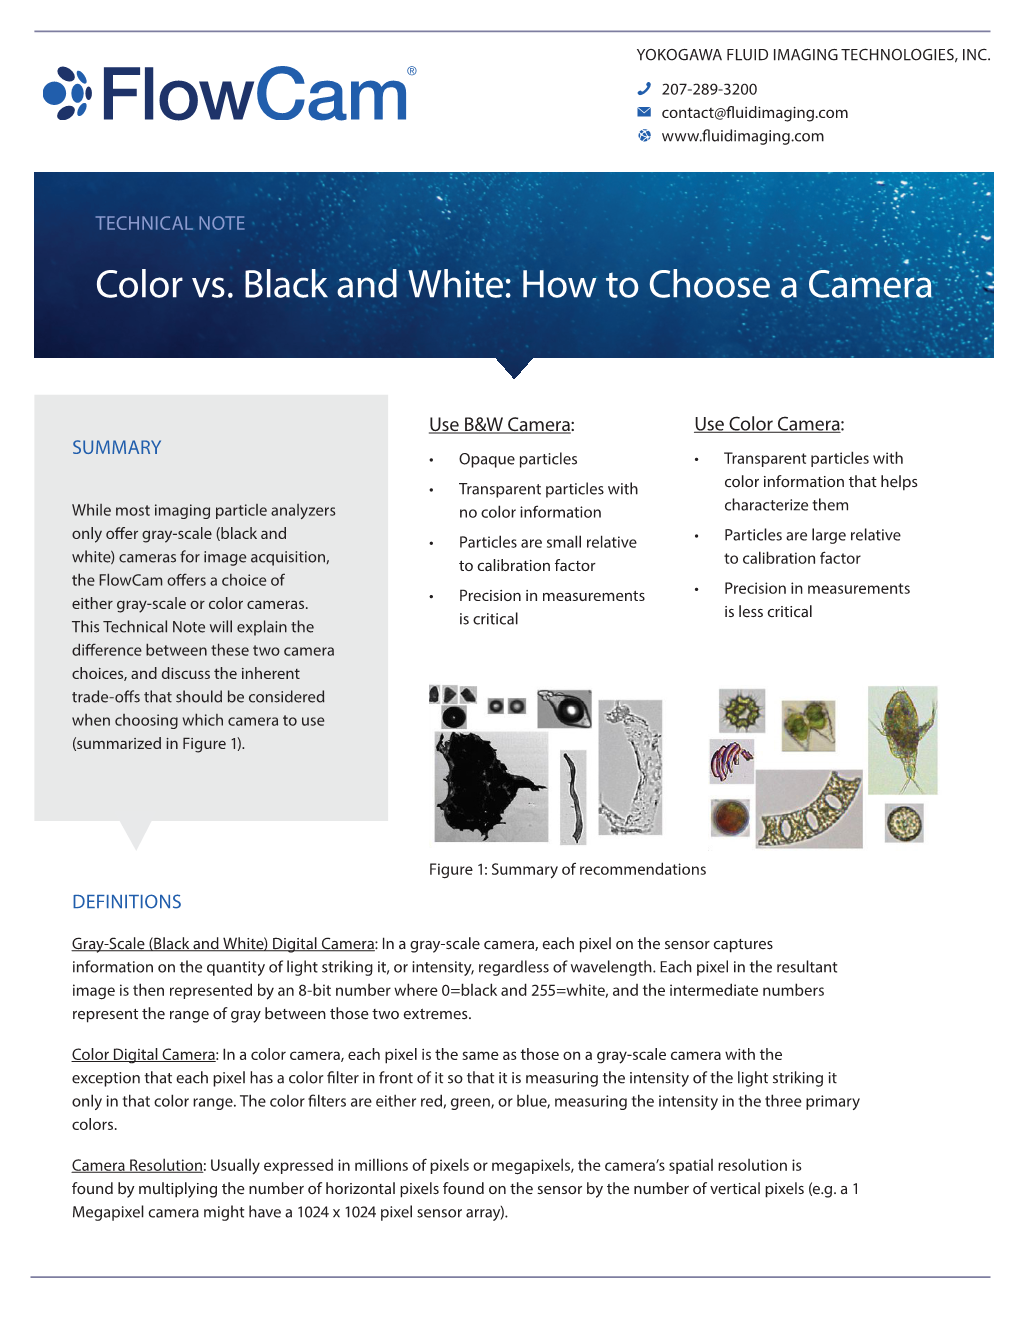 Color Vs. Black and White: How to Choose a Camera